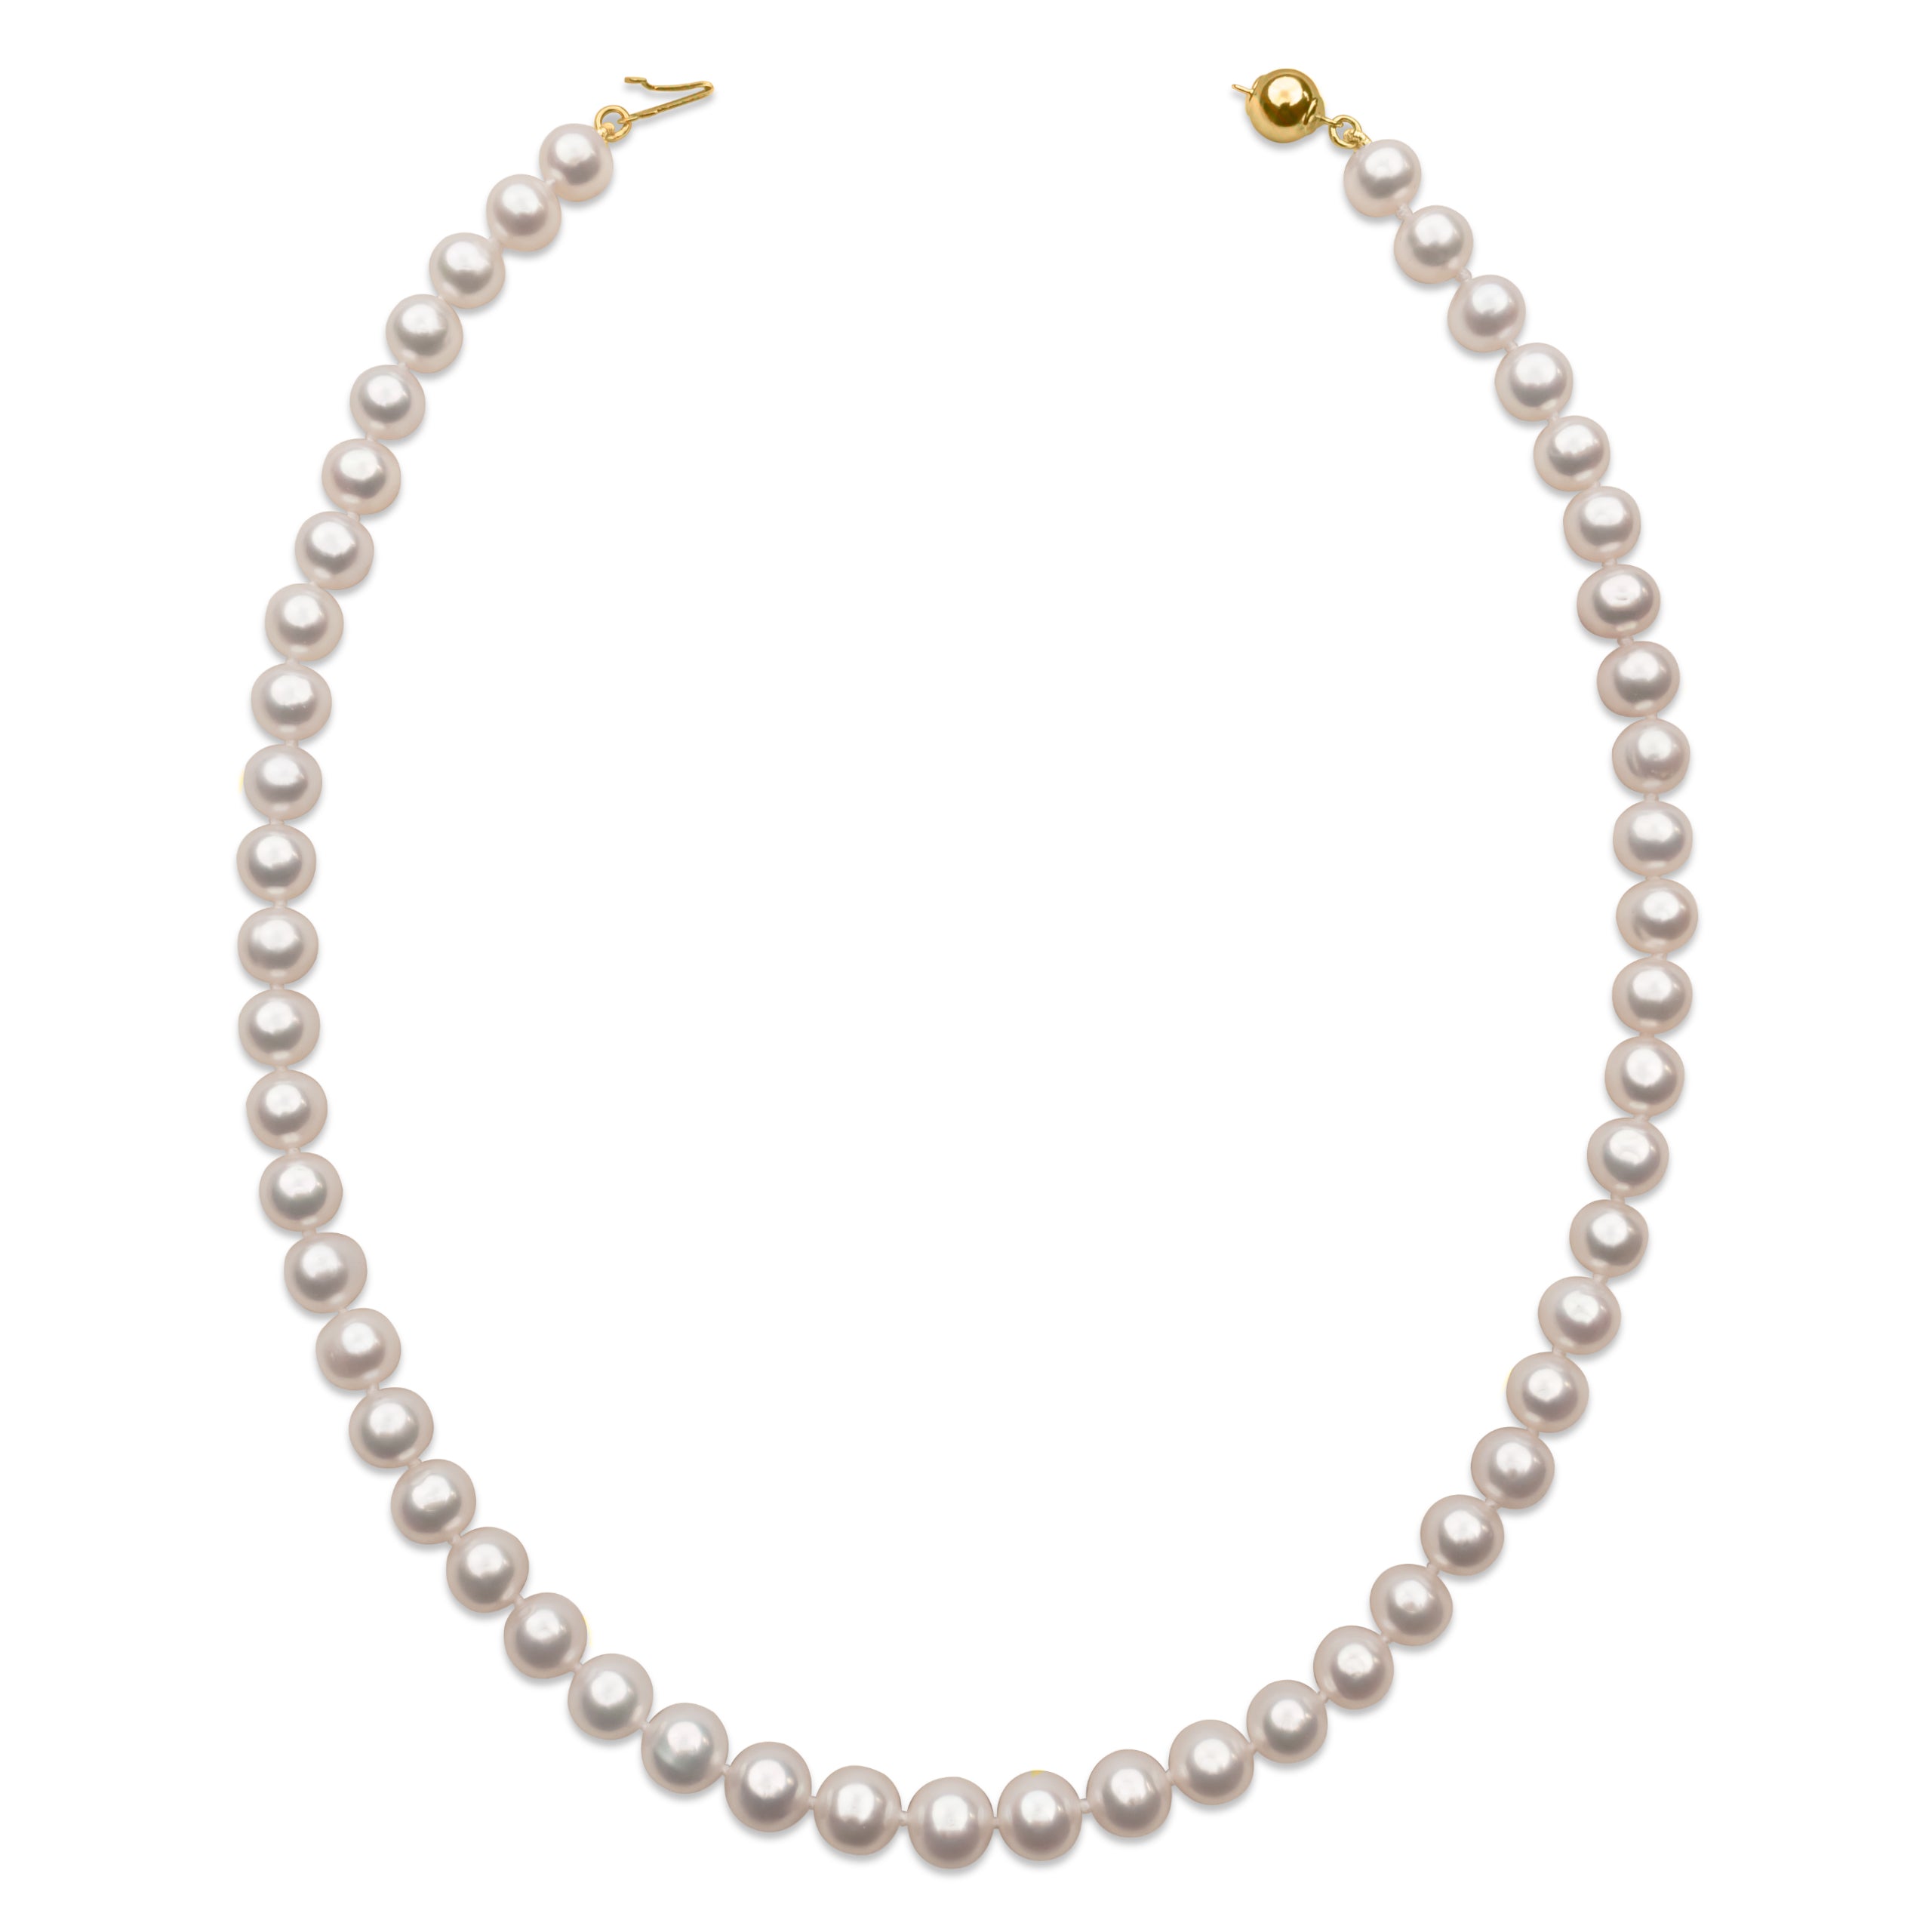 7.5-8.5mm AAA Freshwater Cultured Pearl Necklace, 45cm Long | 18K Gold